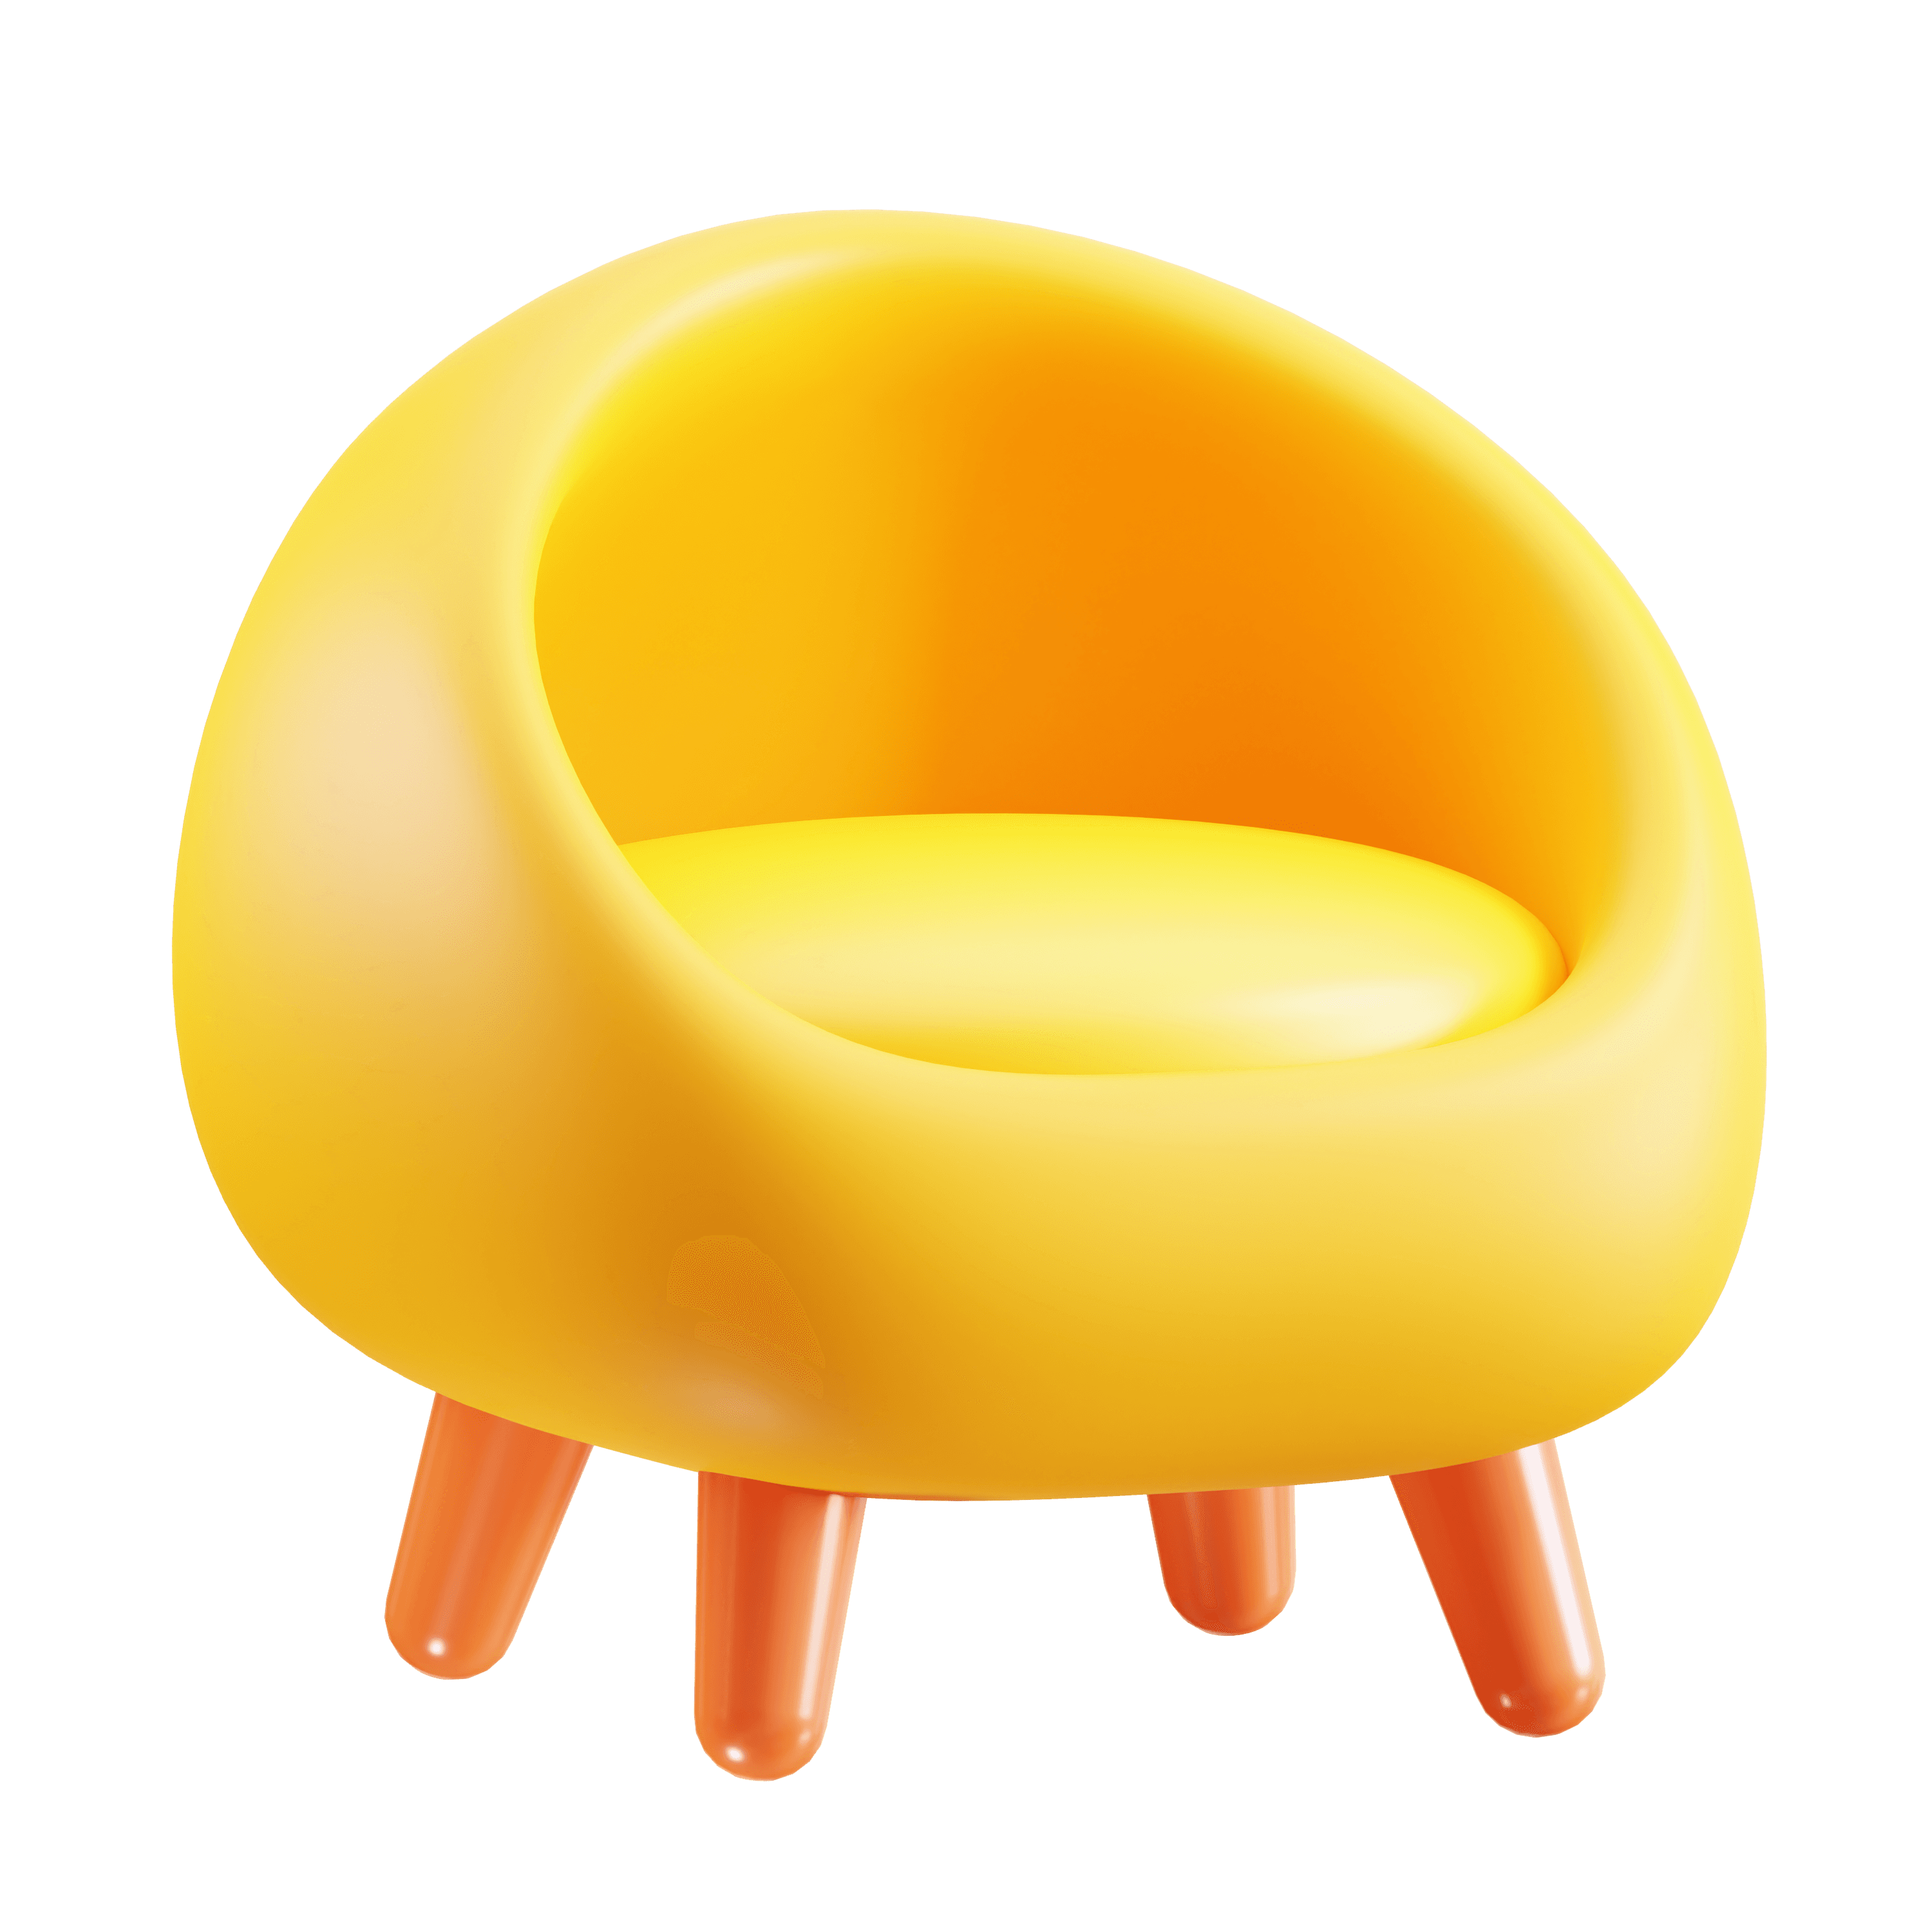 3D Furnitiure Models For Kids And Also Can Printable 3d model